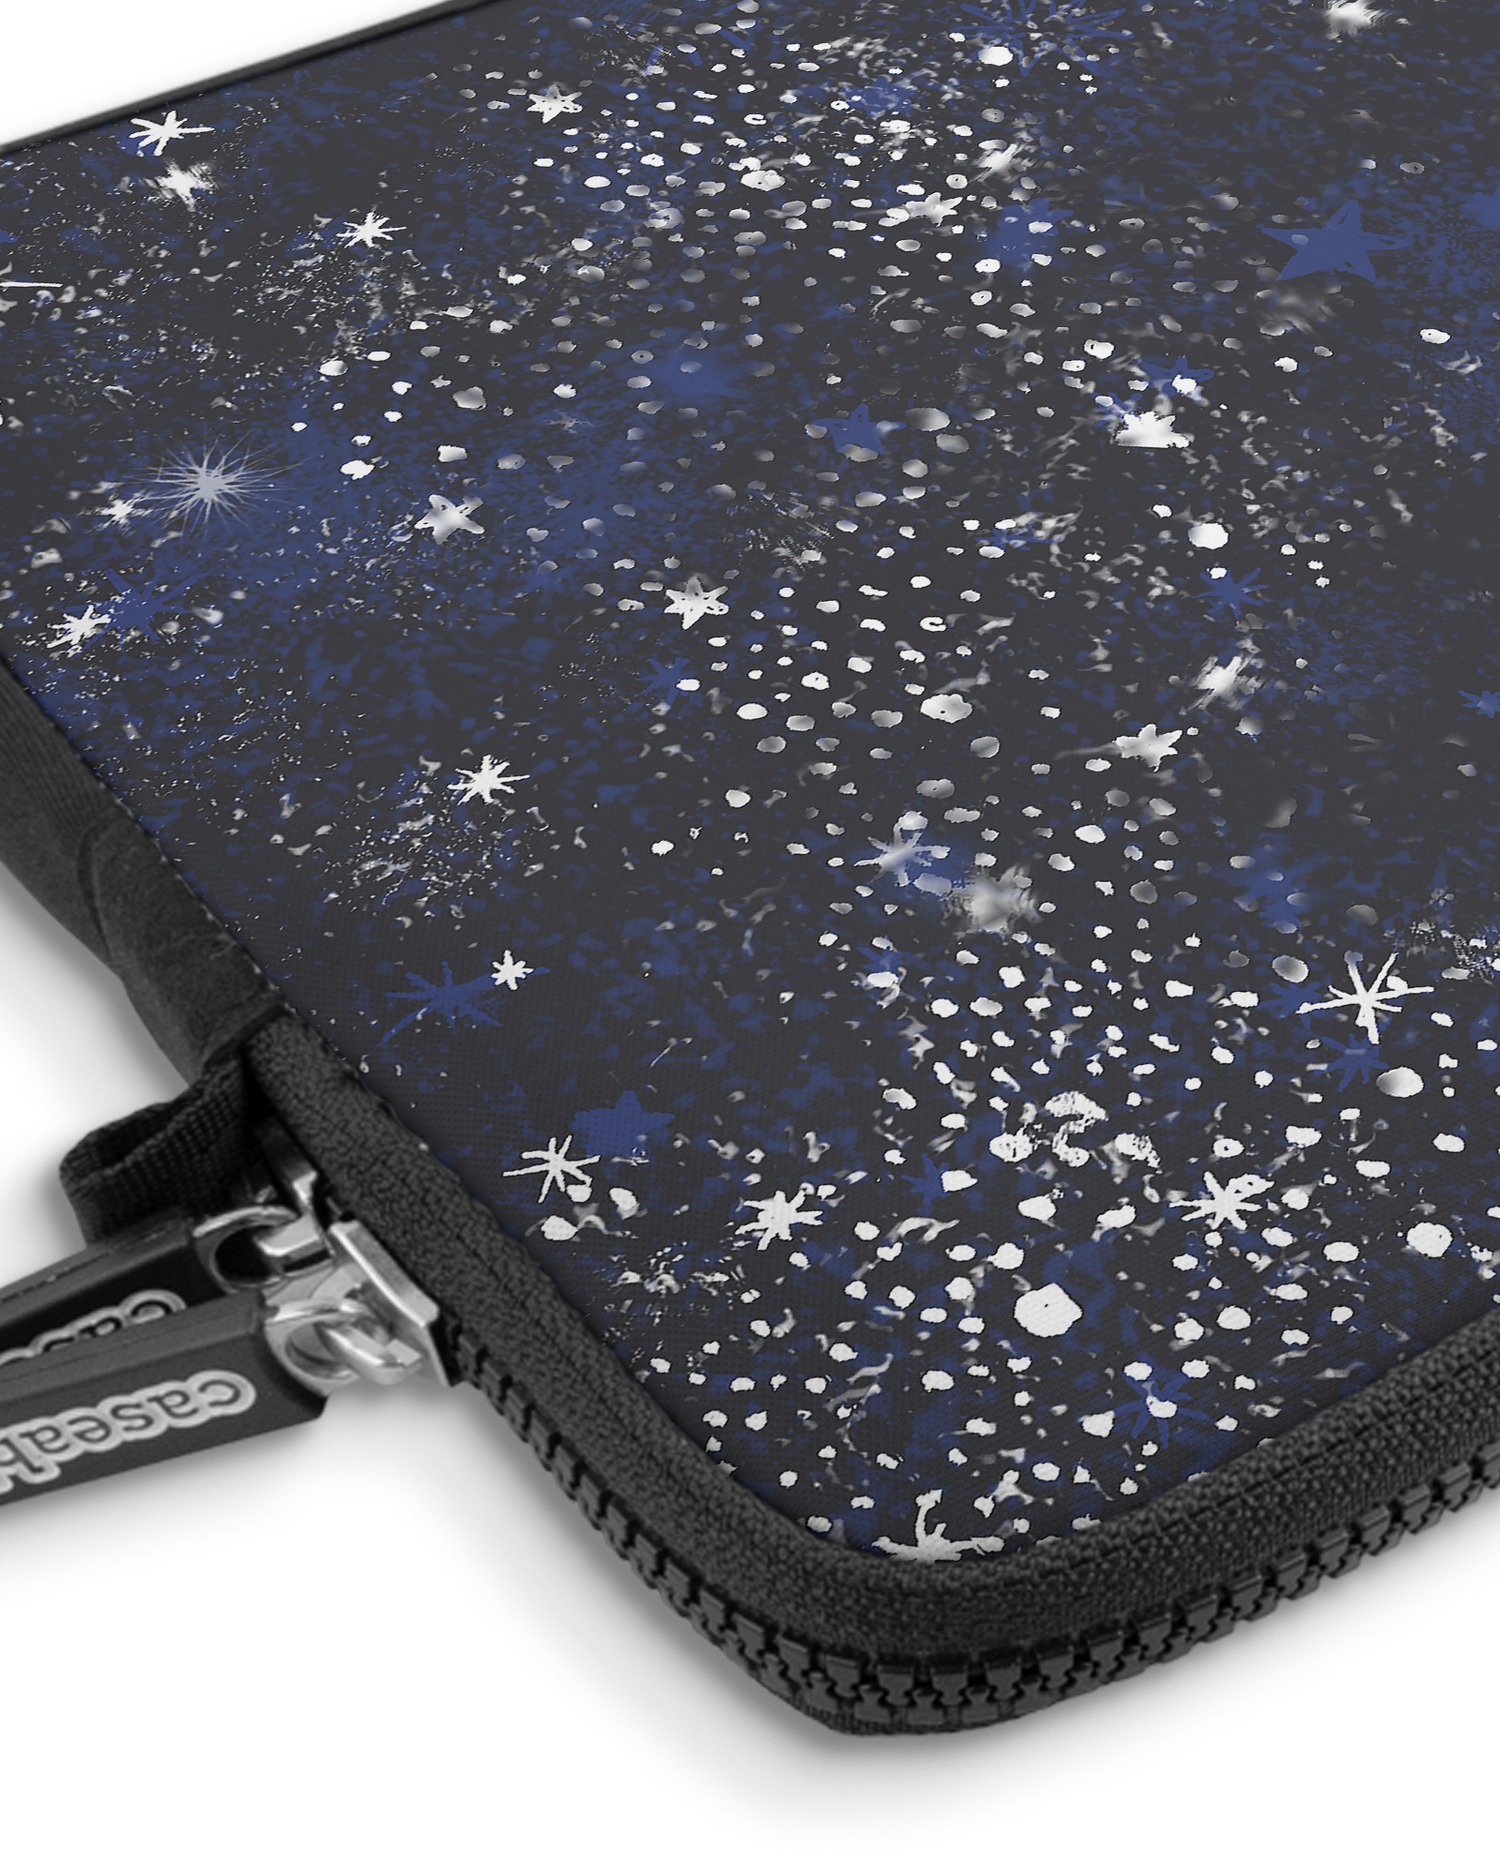 Starry Night Sky Premium Laptop Bag 13 inch with device inside